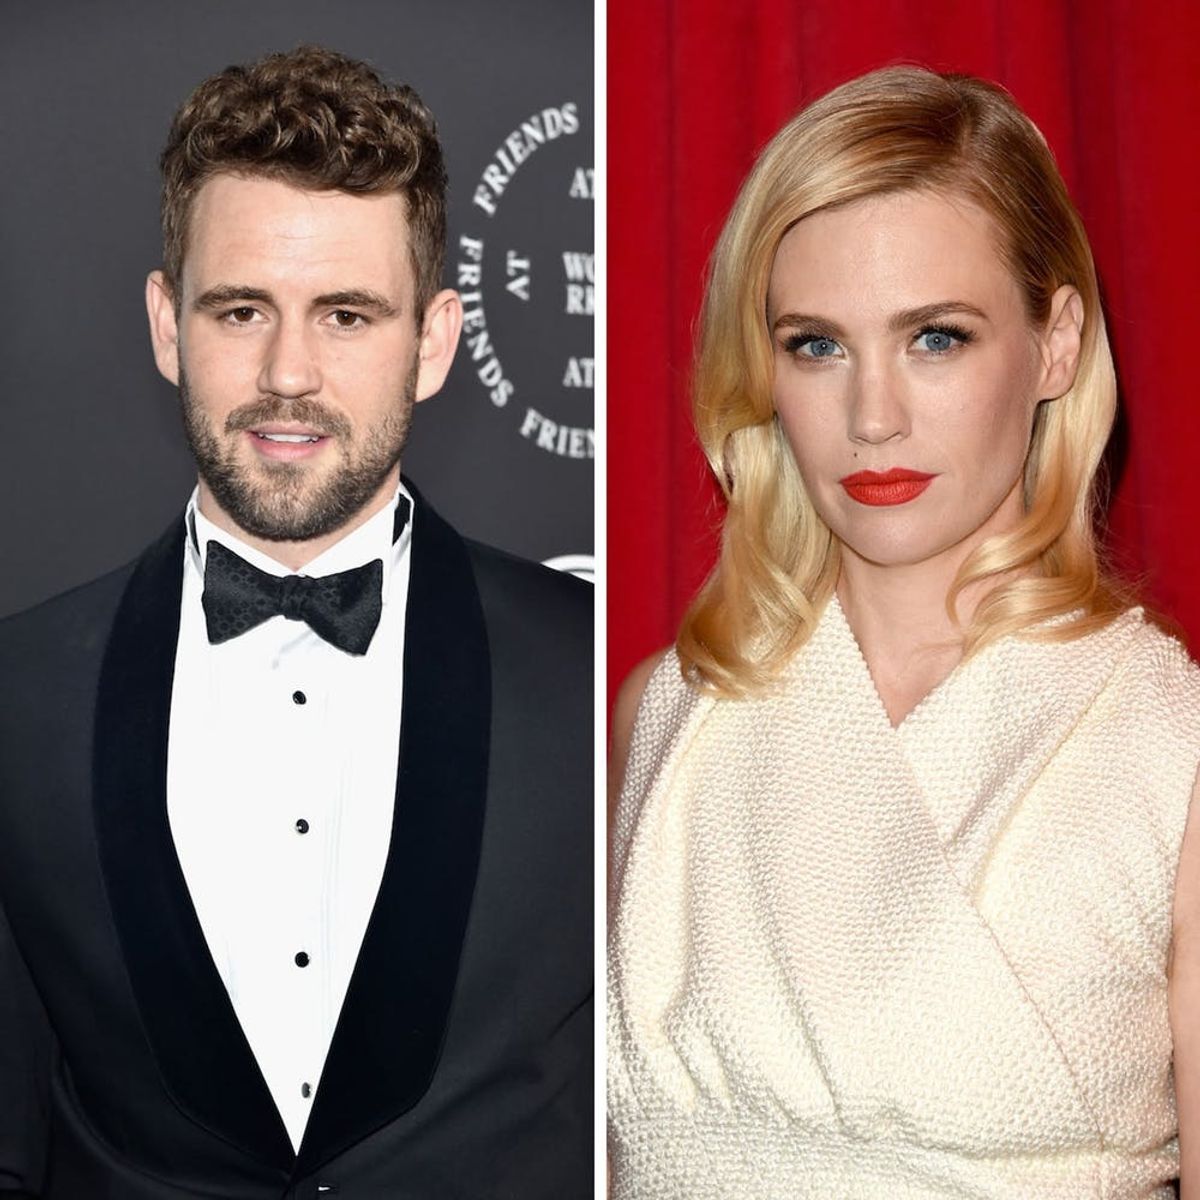 Here’s What January Jones Had to Say About Those Nick Viall Dating Rumors